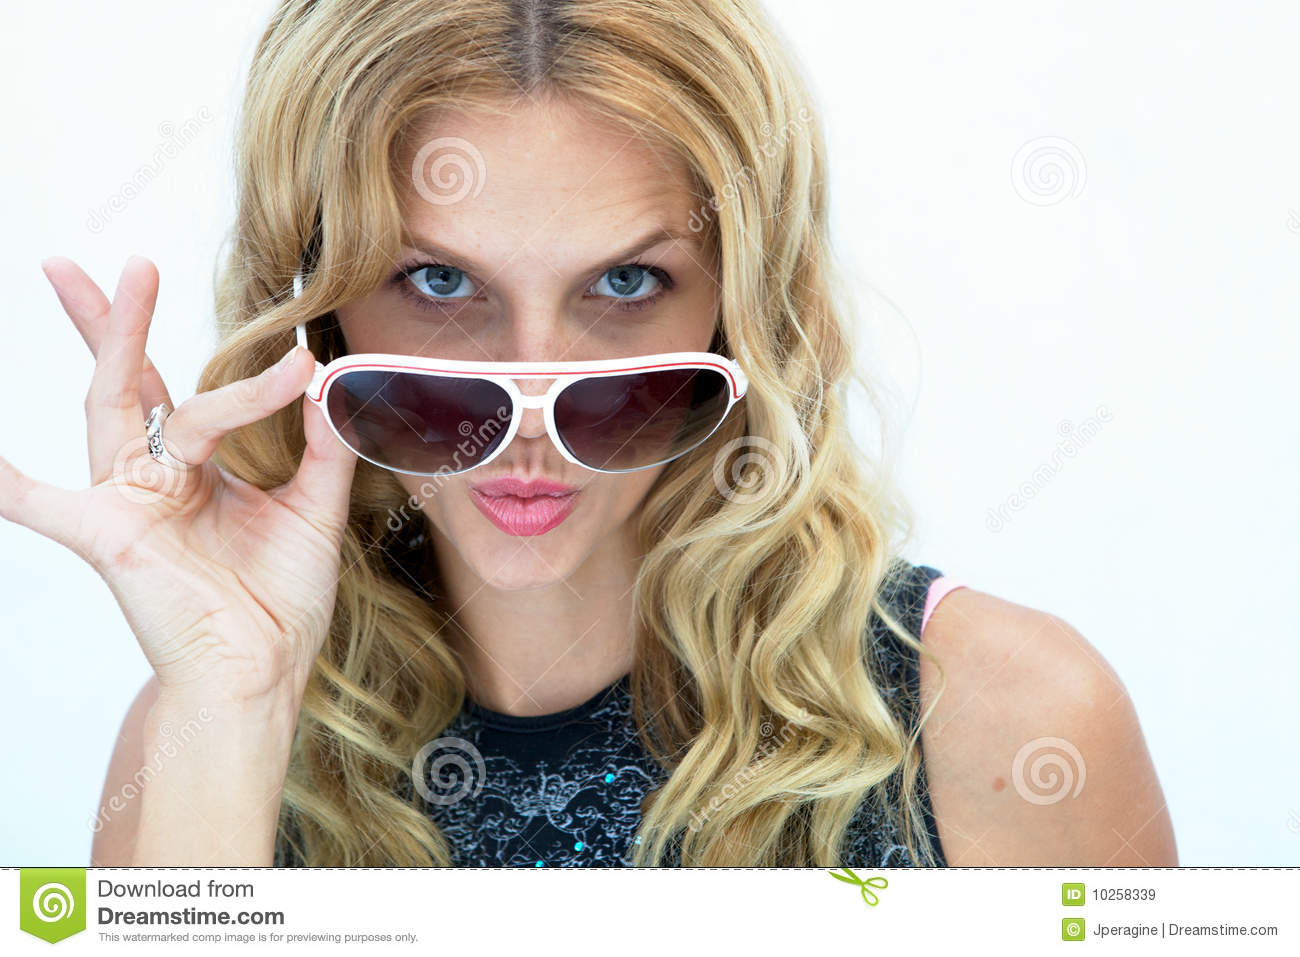 Female Rock Star Royalty Free Stock Images   Image  10258339